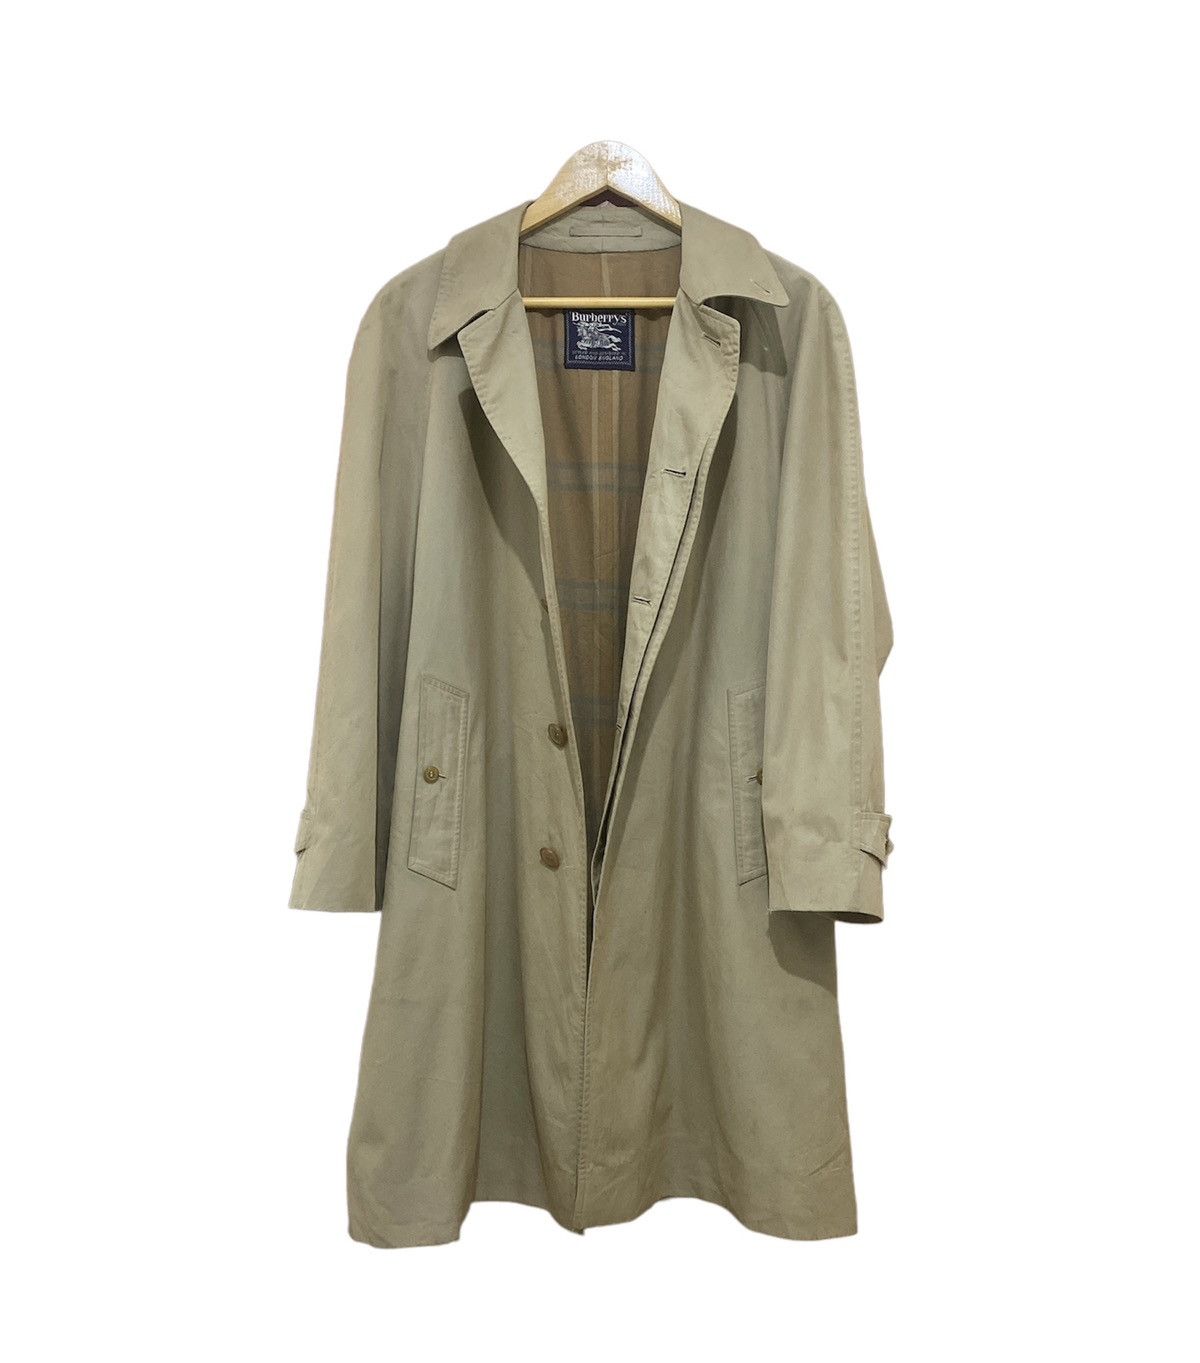 Vintage Classic Burberry Trench Coat - 3